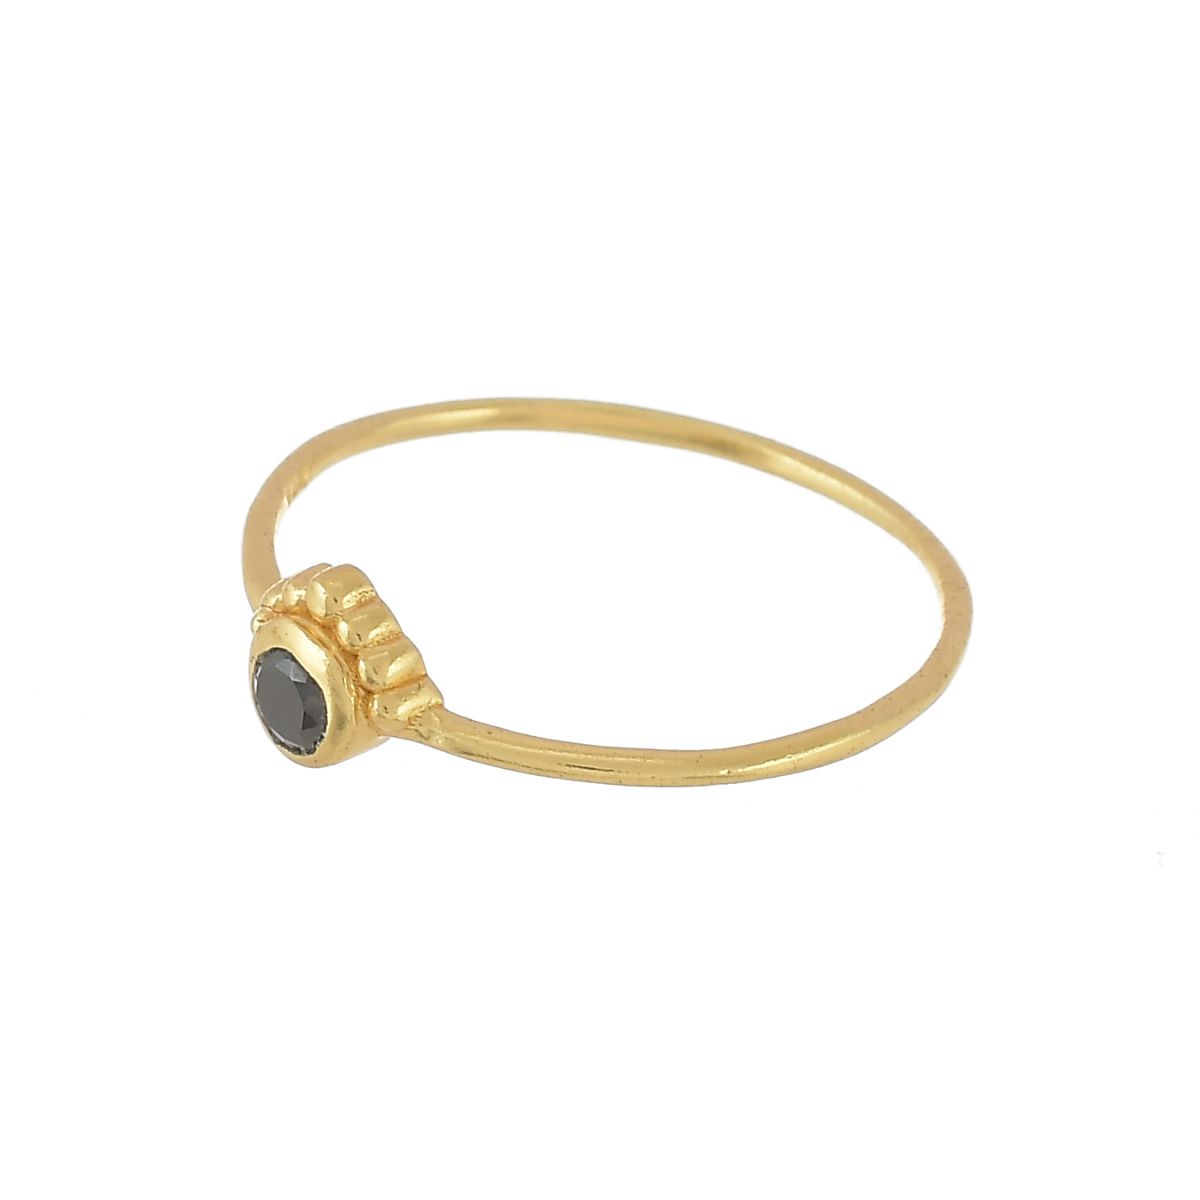 ee ring size 56 3mm black agate etnic gold plated